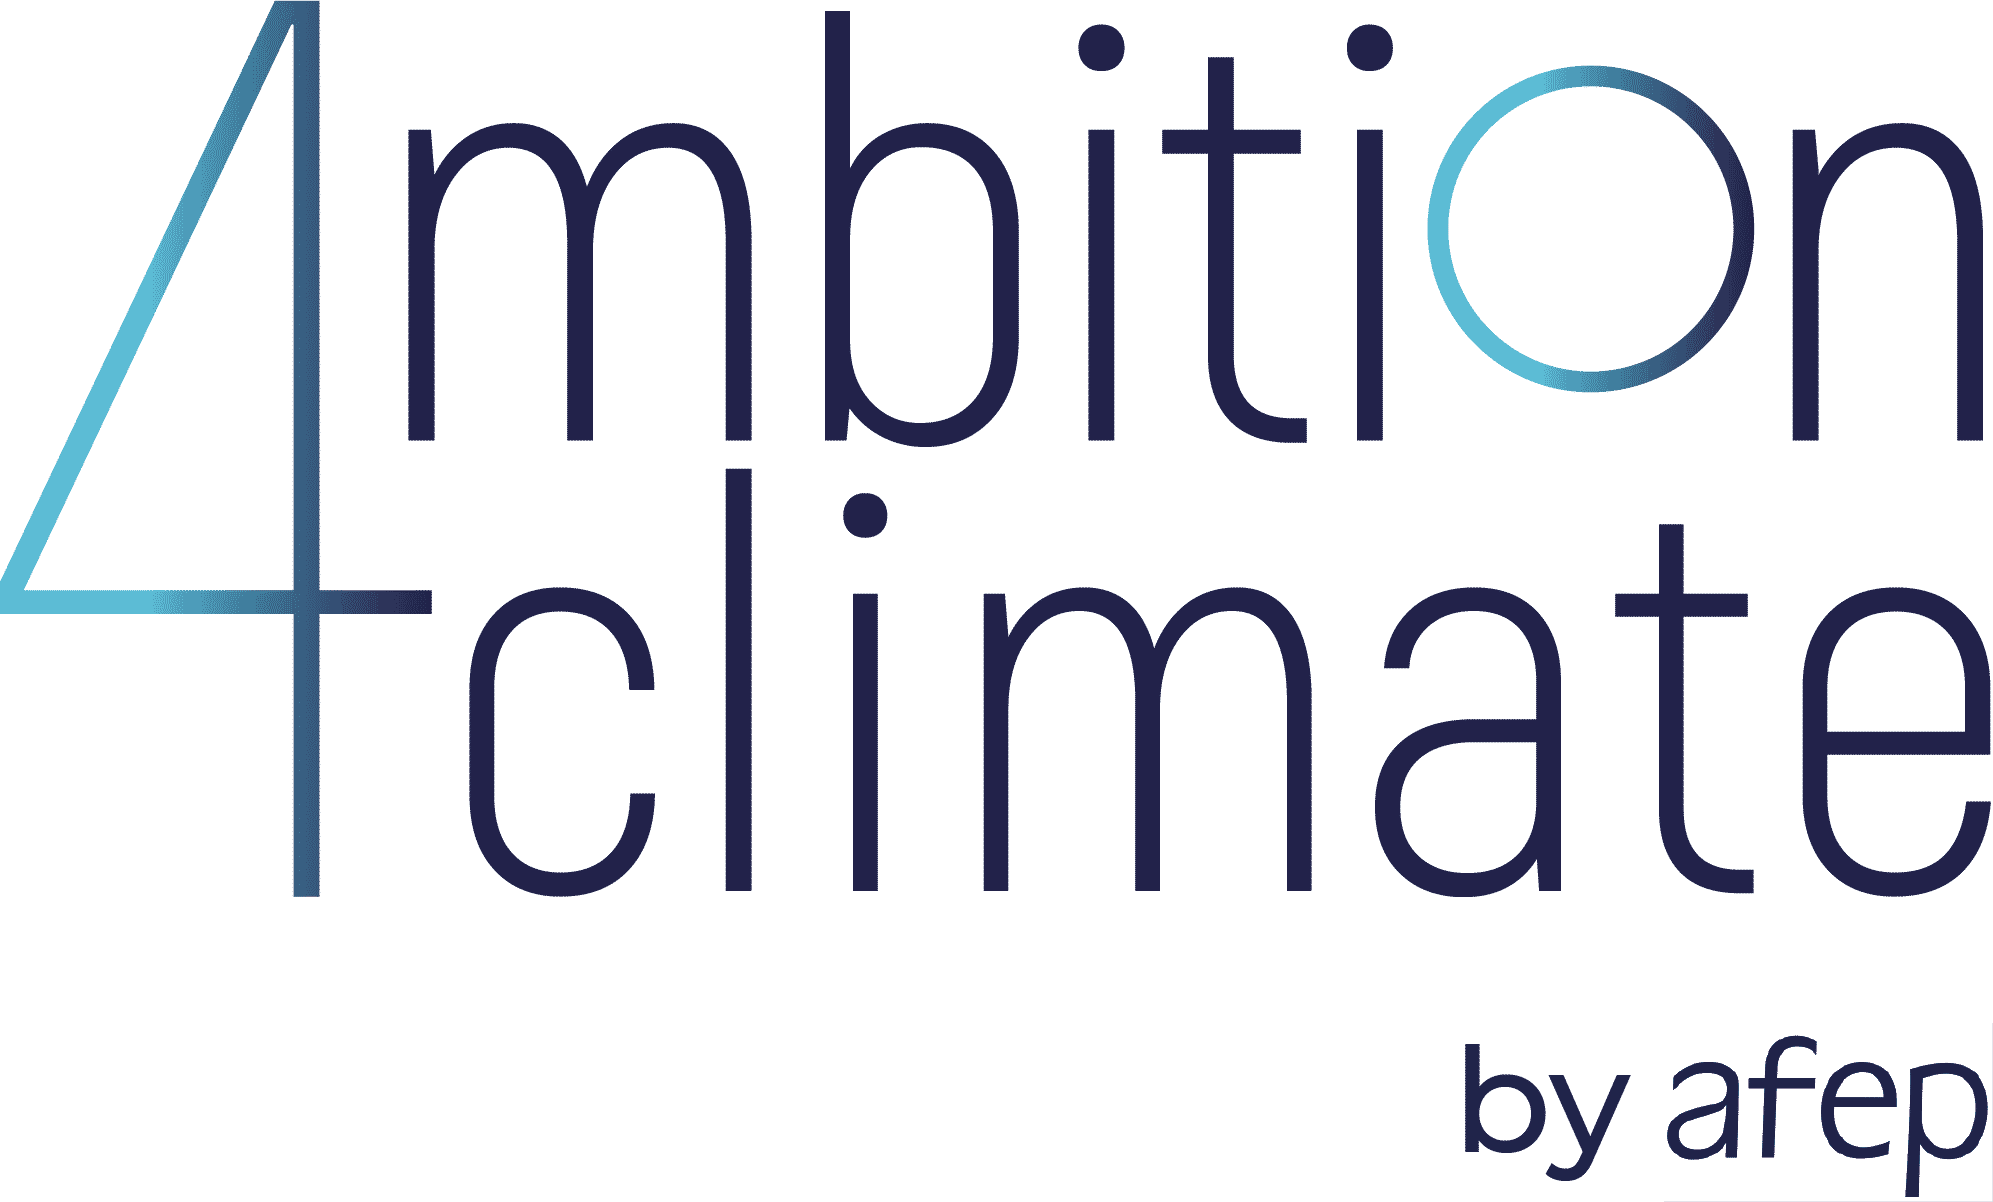 Ambition4climate